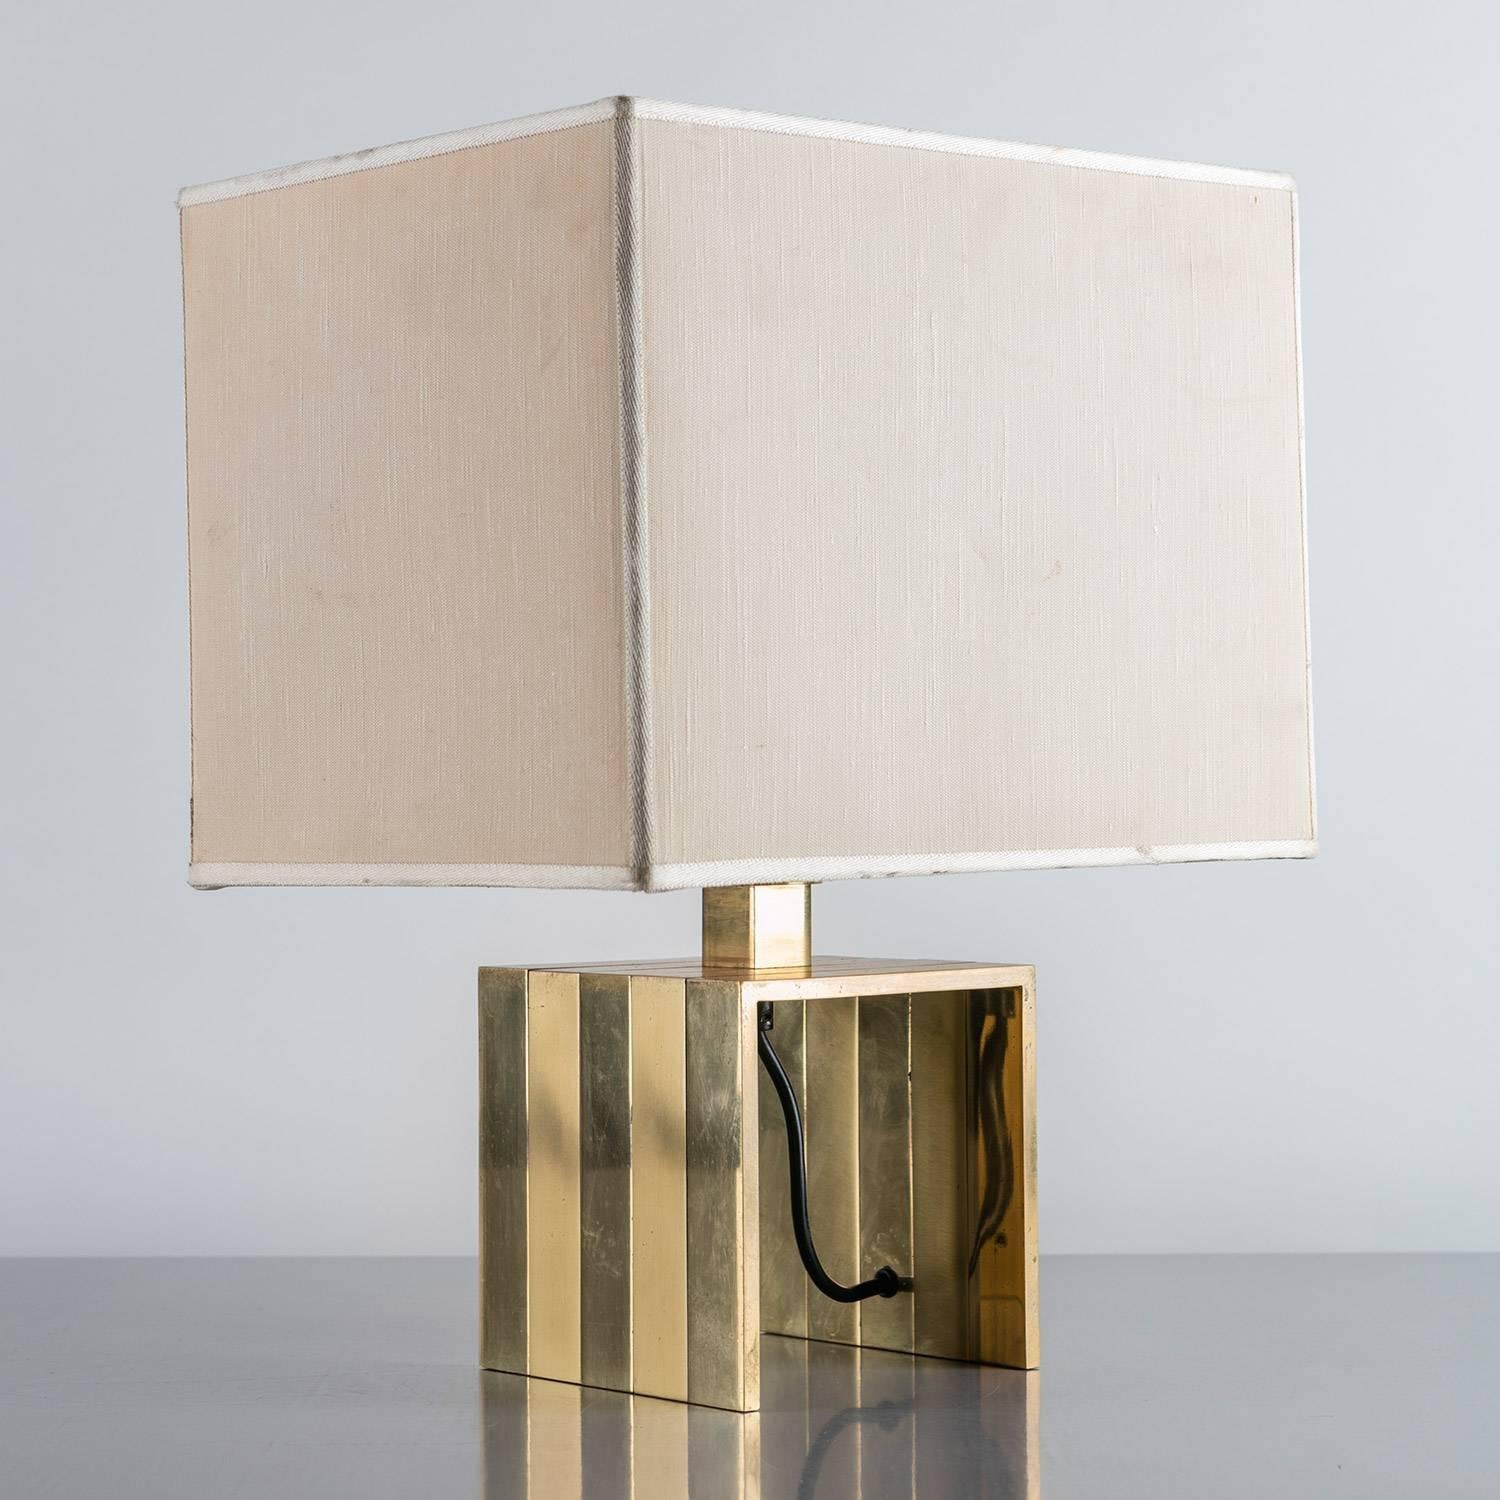 Italian Brass Table Lamp by F.lli Martini, Italy, 1970s For Sale